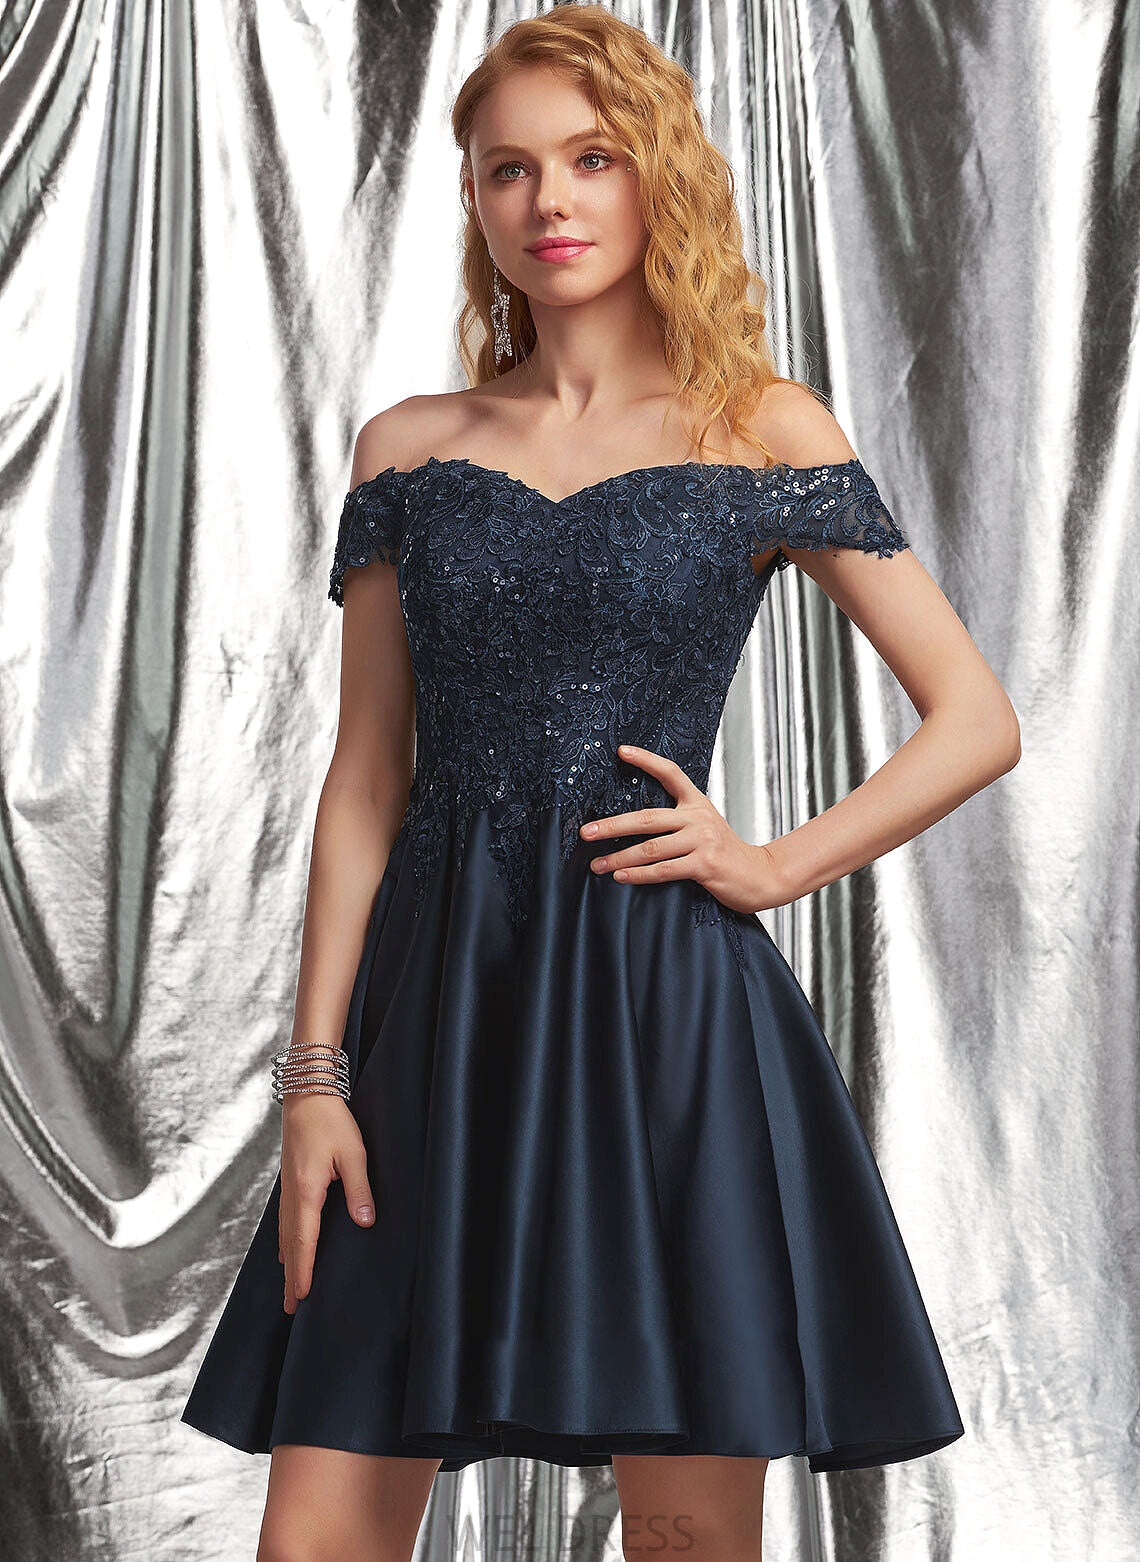 Lace Sequins Sarahi Prom Dresses With Off-the-Shoulder Short/Mini Satin A-Line